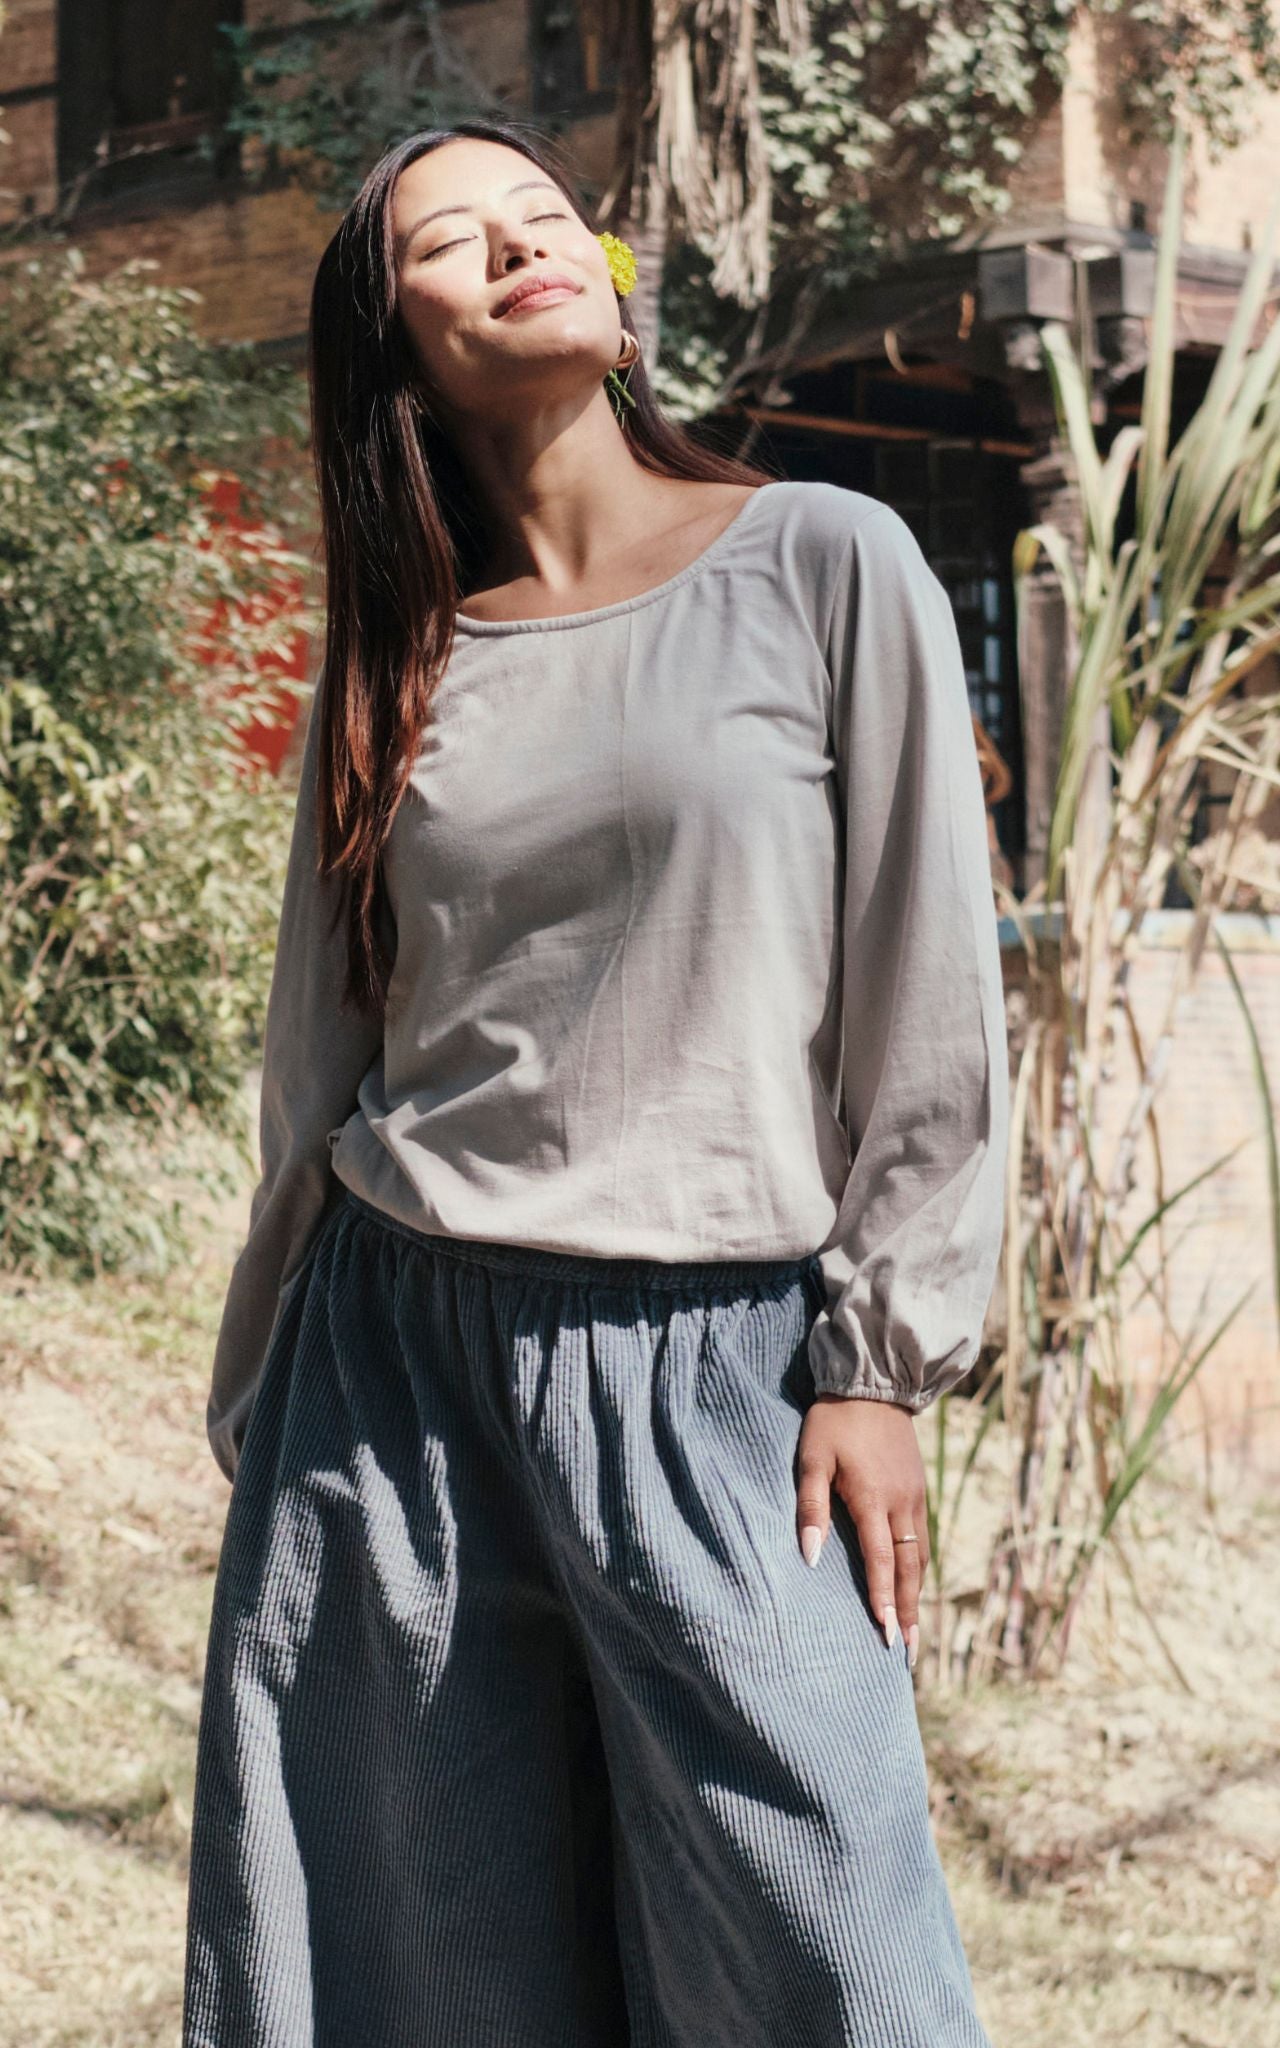 Surya The Label Ethical Organic Cotton 'Zoé' Top made in Nepal - Oyster